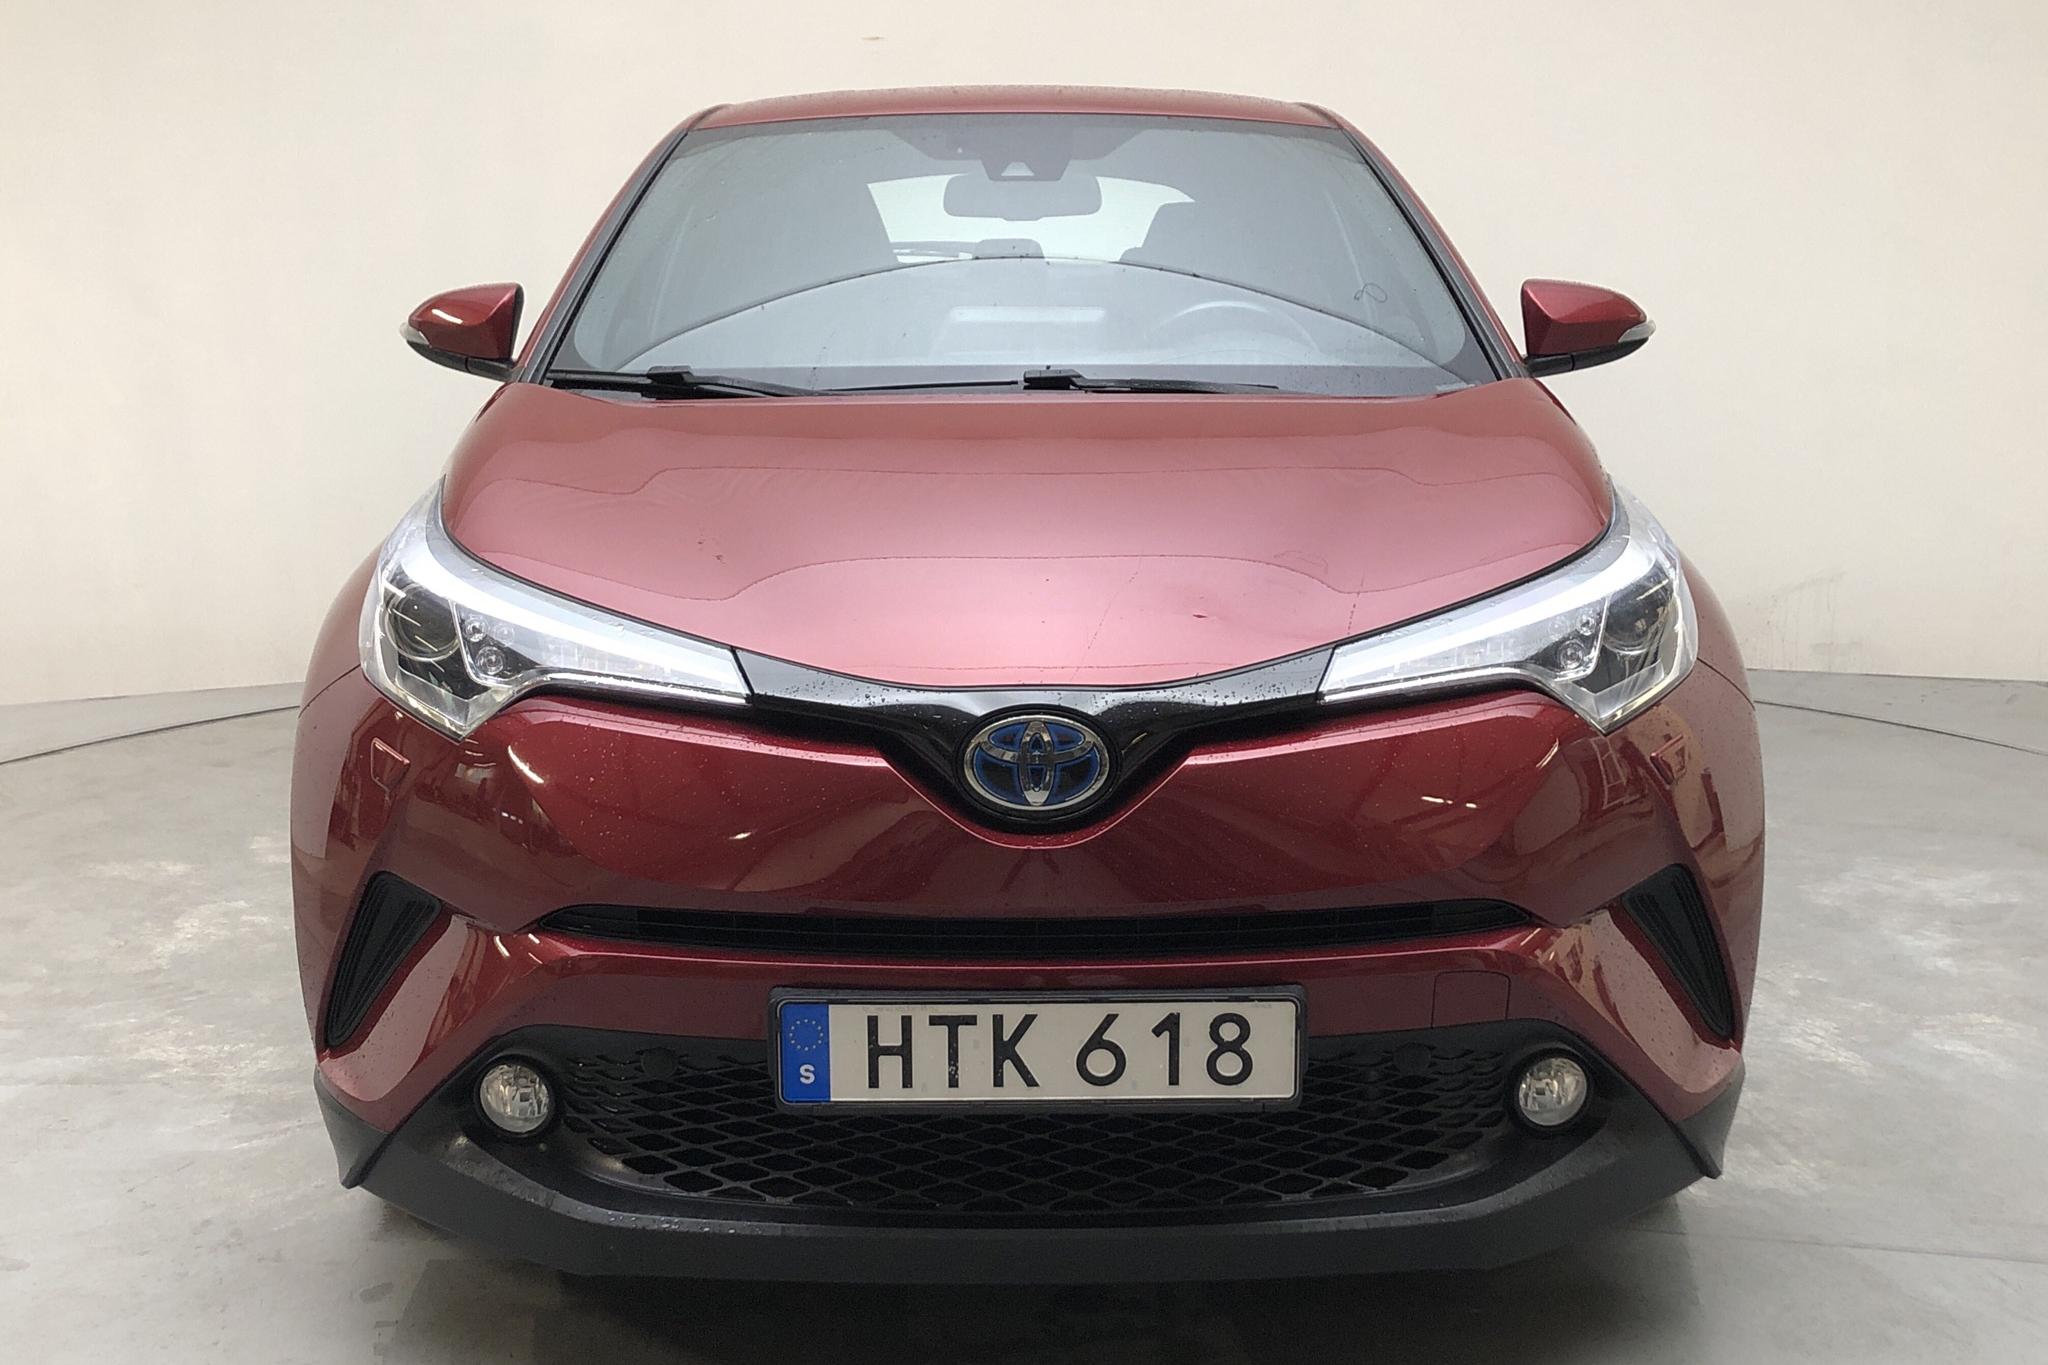 Toyota C-HR 1.8 HSD (122hk) - 90 820 km - Automatic - red - 2018